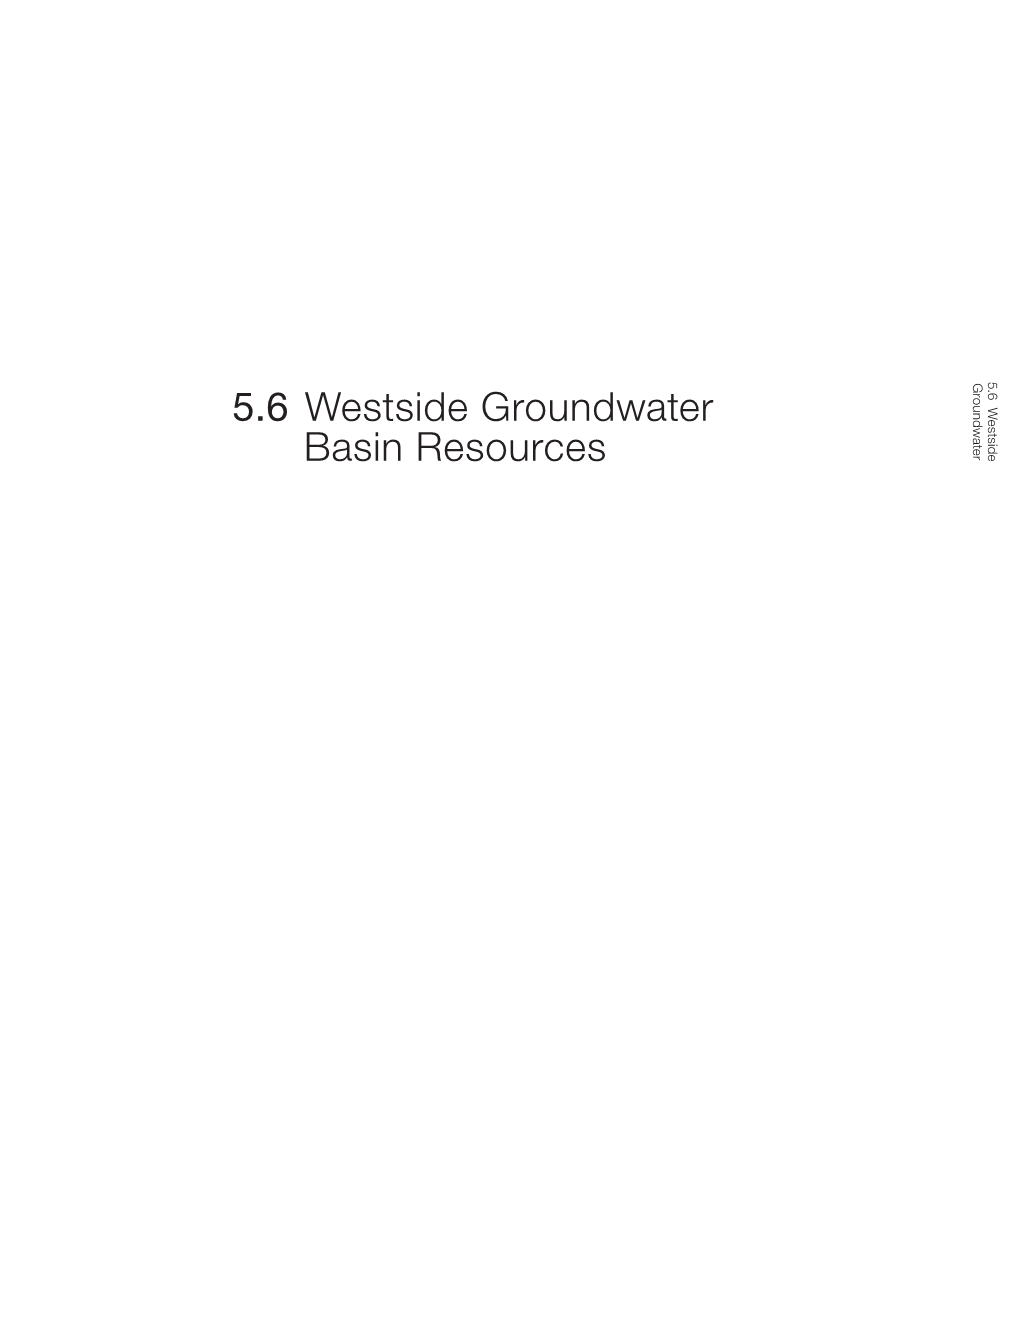 5.6 Westside Groundwater Basin Resources 5